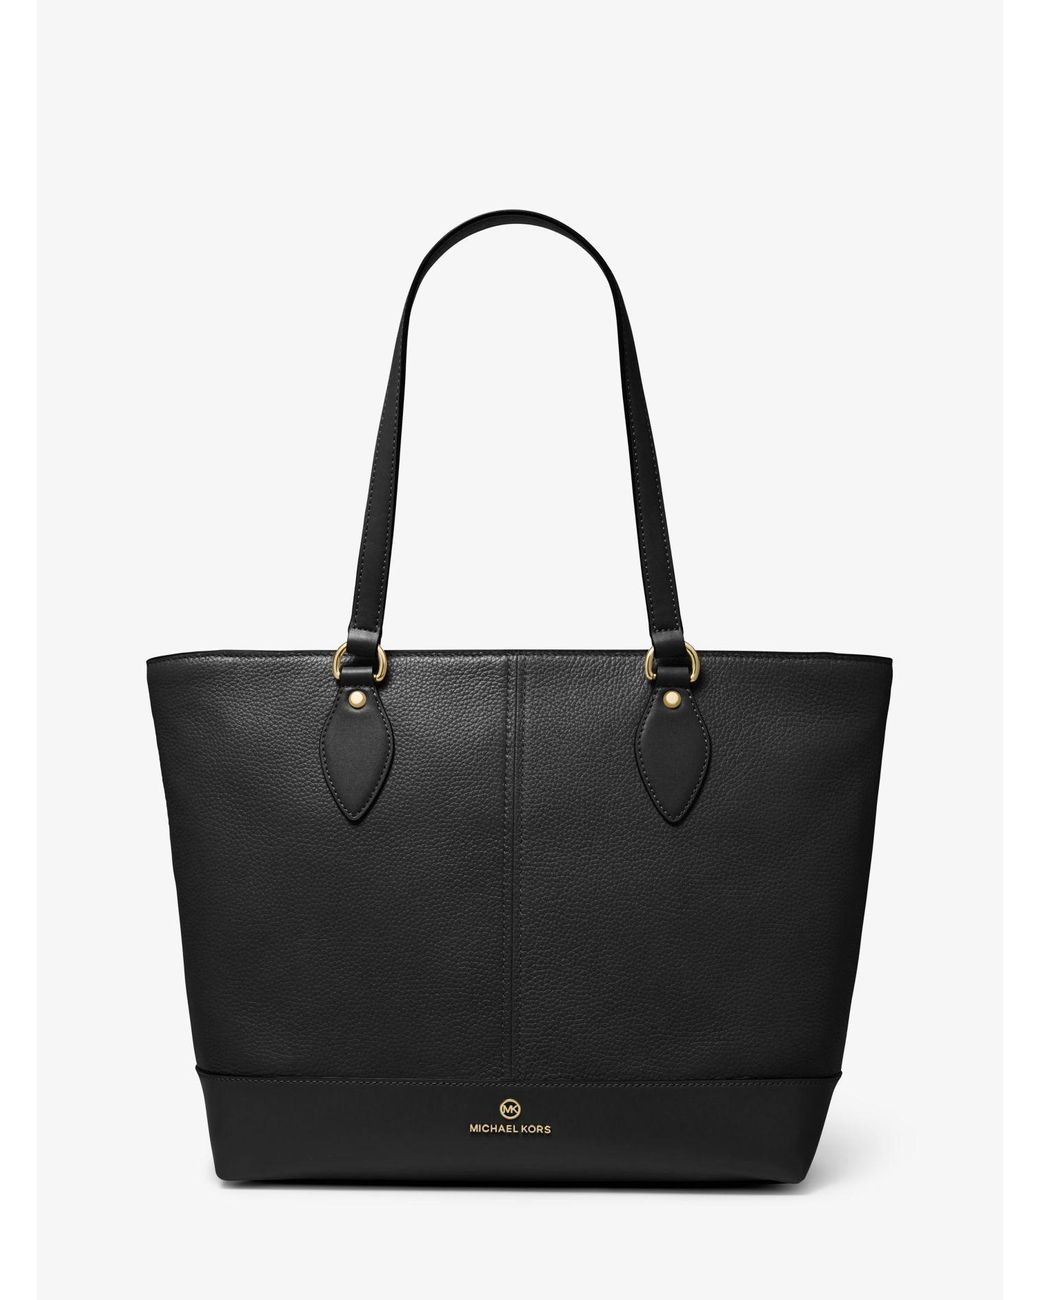 Michael Kors Beth Large Pebbled Leather Tote in Black | Lyst